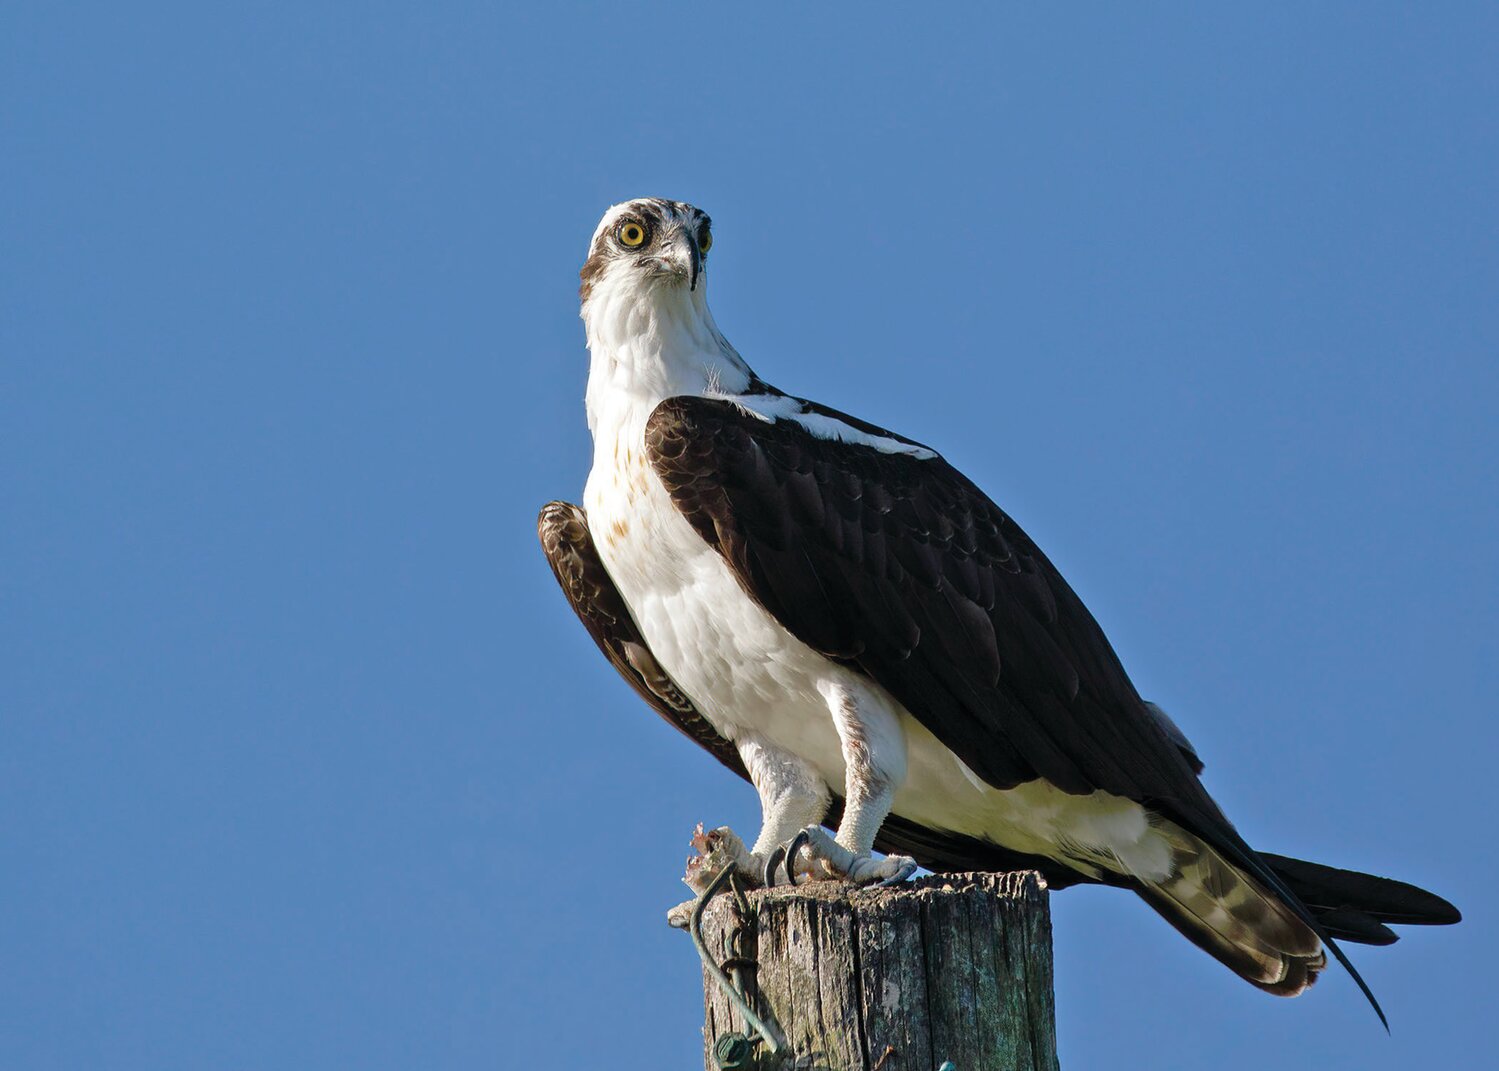 This is a photo of an Osprey